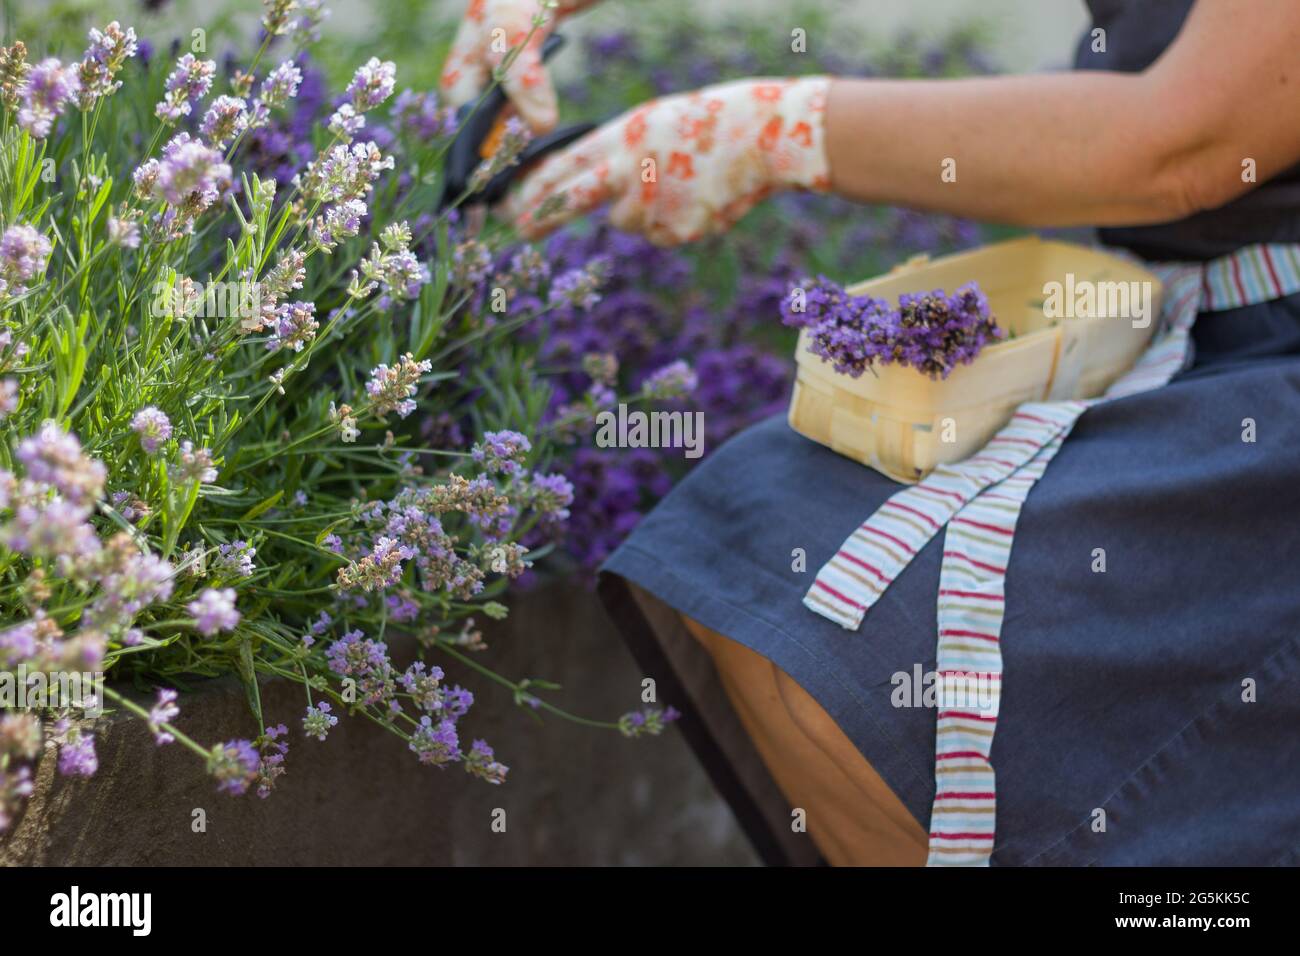 Ripe spikelets of narrow-leaved lavender, ready for cutting. Selective focus. Female hands in gardening gloves holding a pruner and pruning a lavender Stock Photo